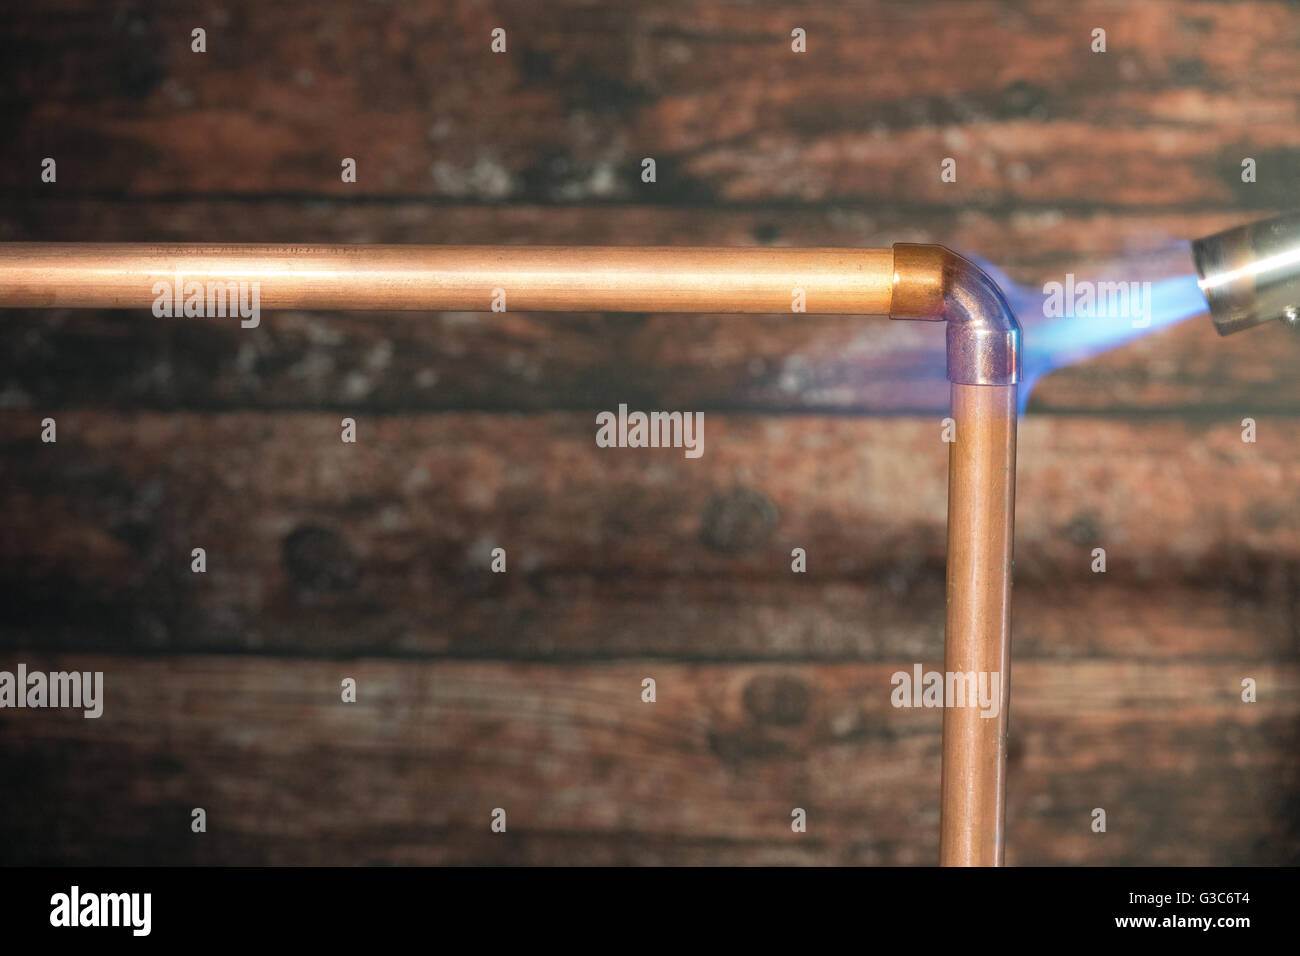 Soldering a bend onto copper tube with a blowtorch Stock Photo